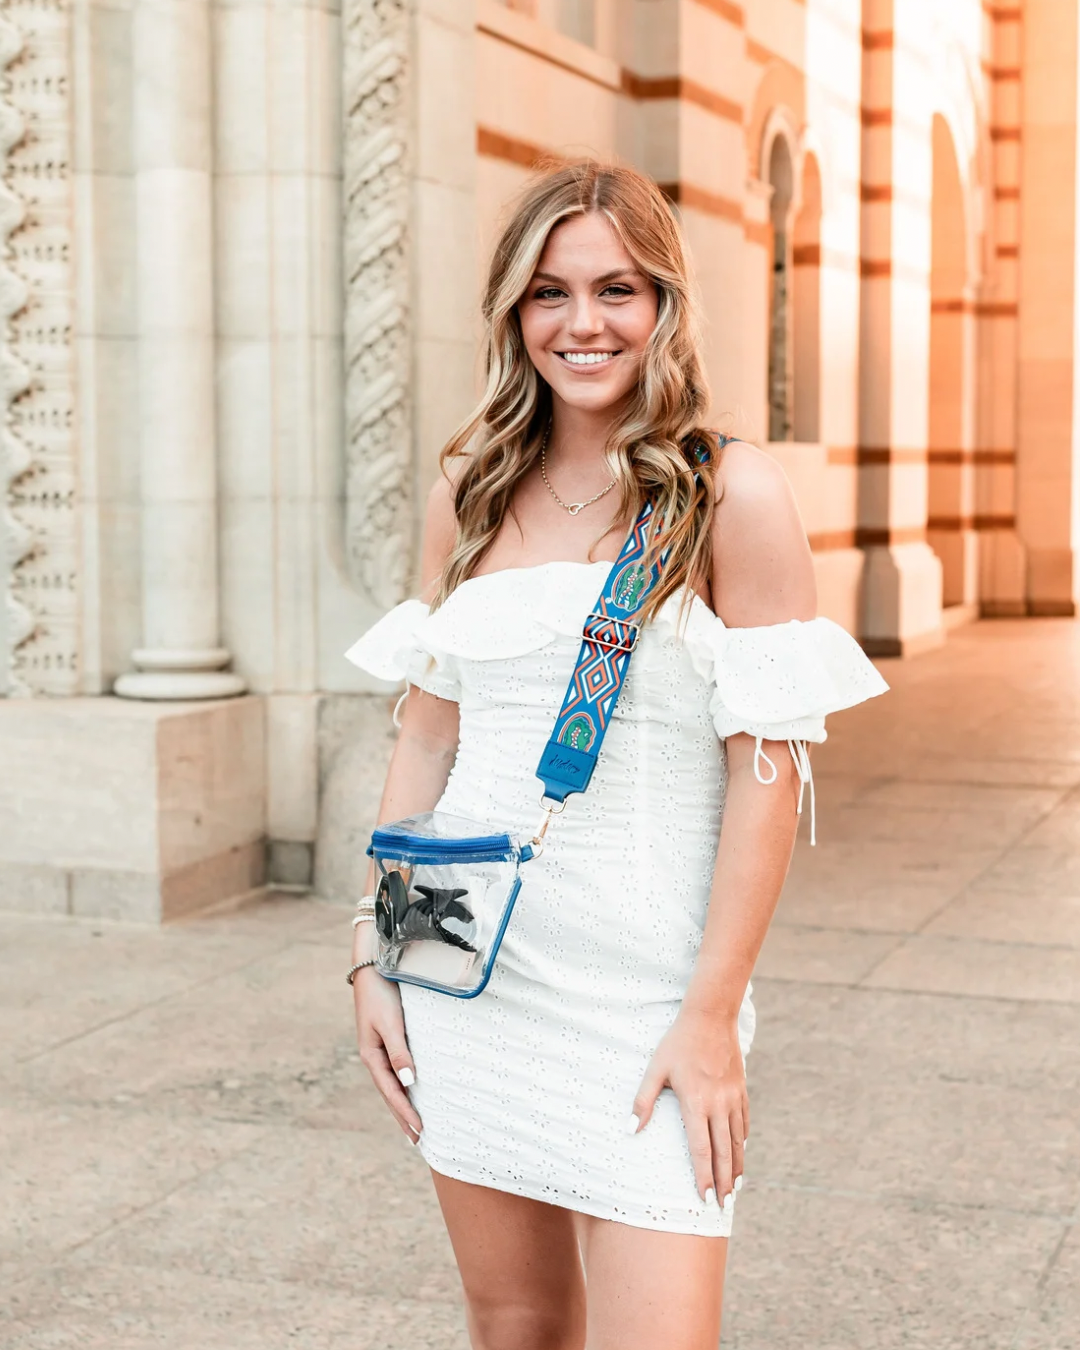 Desden - gameday style, clear purses, fanny packs and more